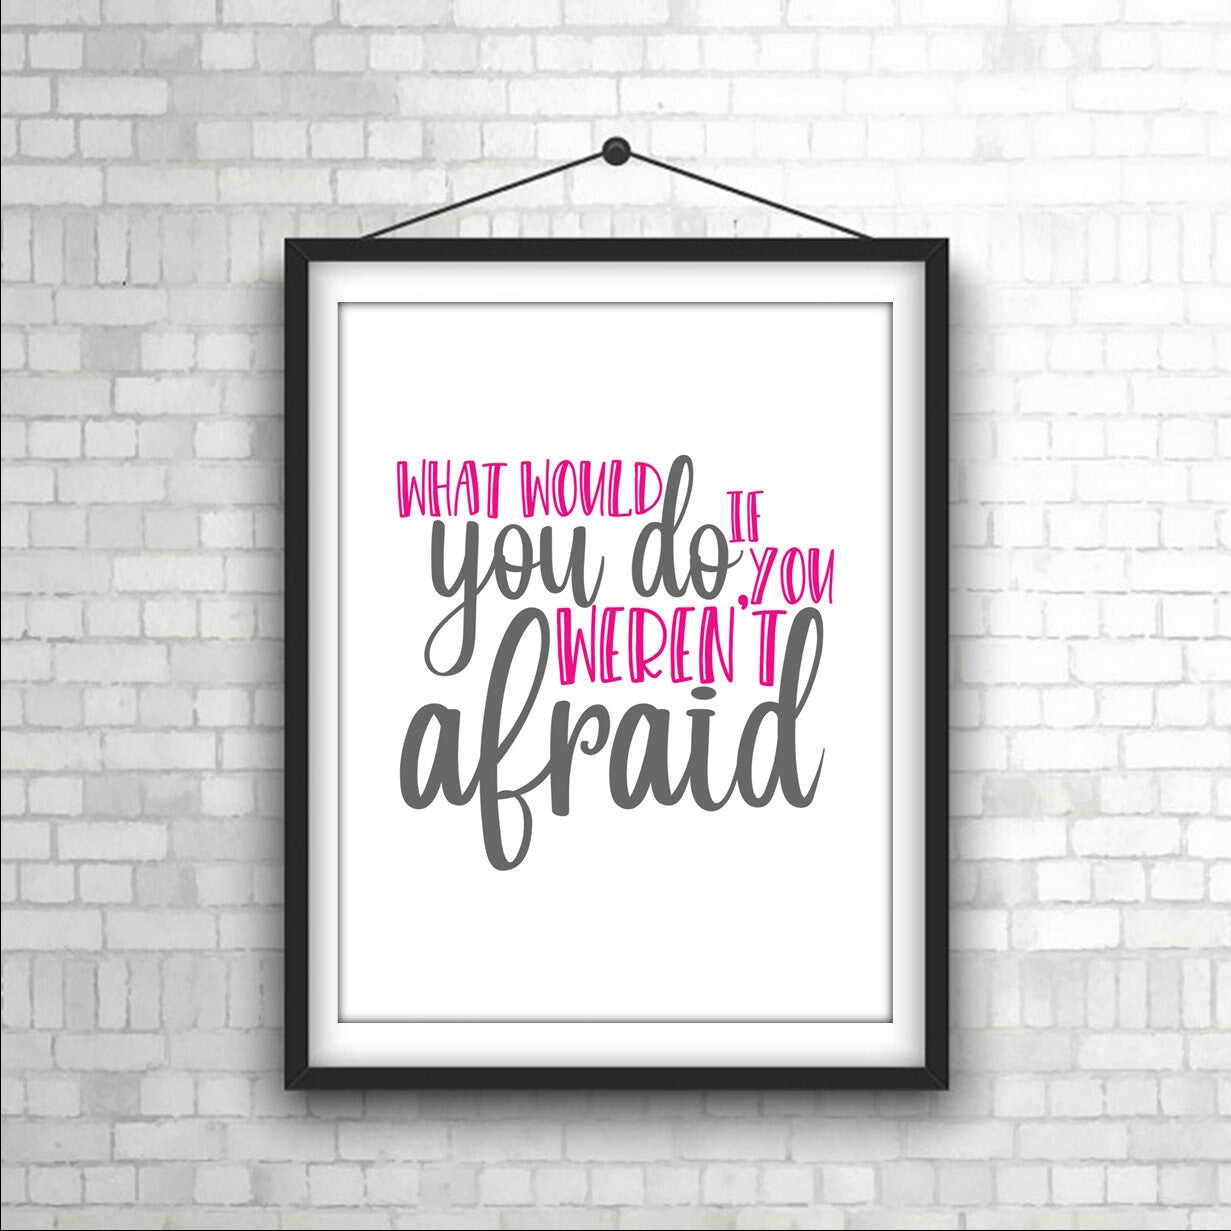 "What would you do if you weren't Afraid" Empowering Wall Art Print